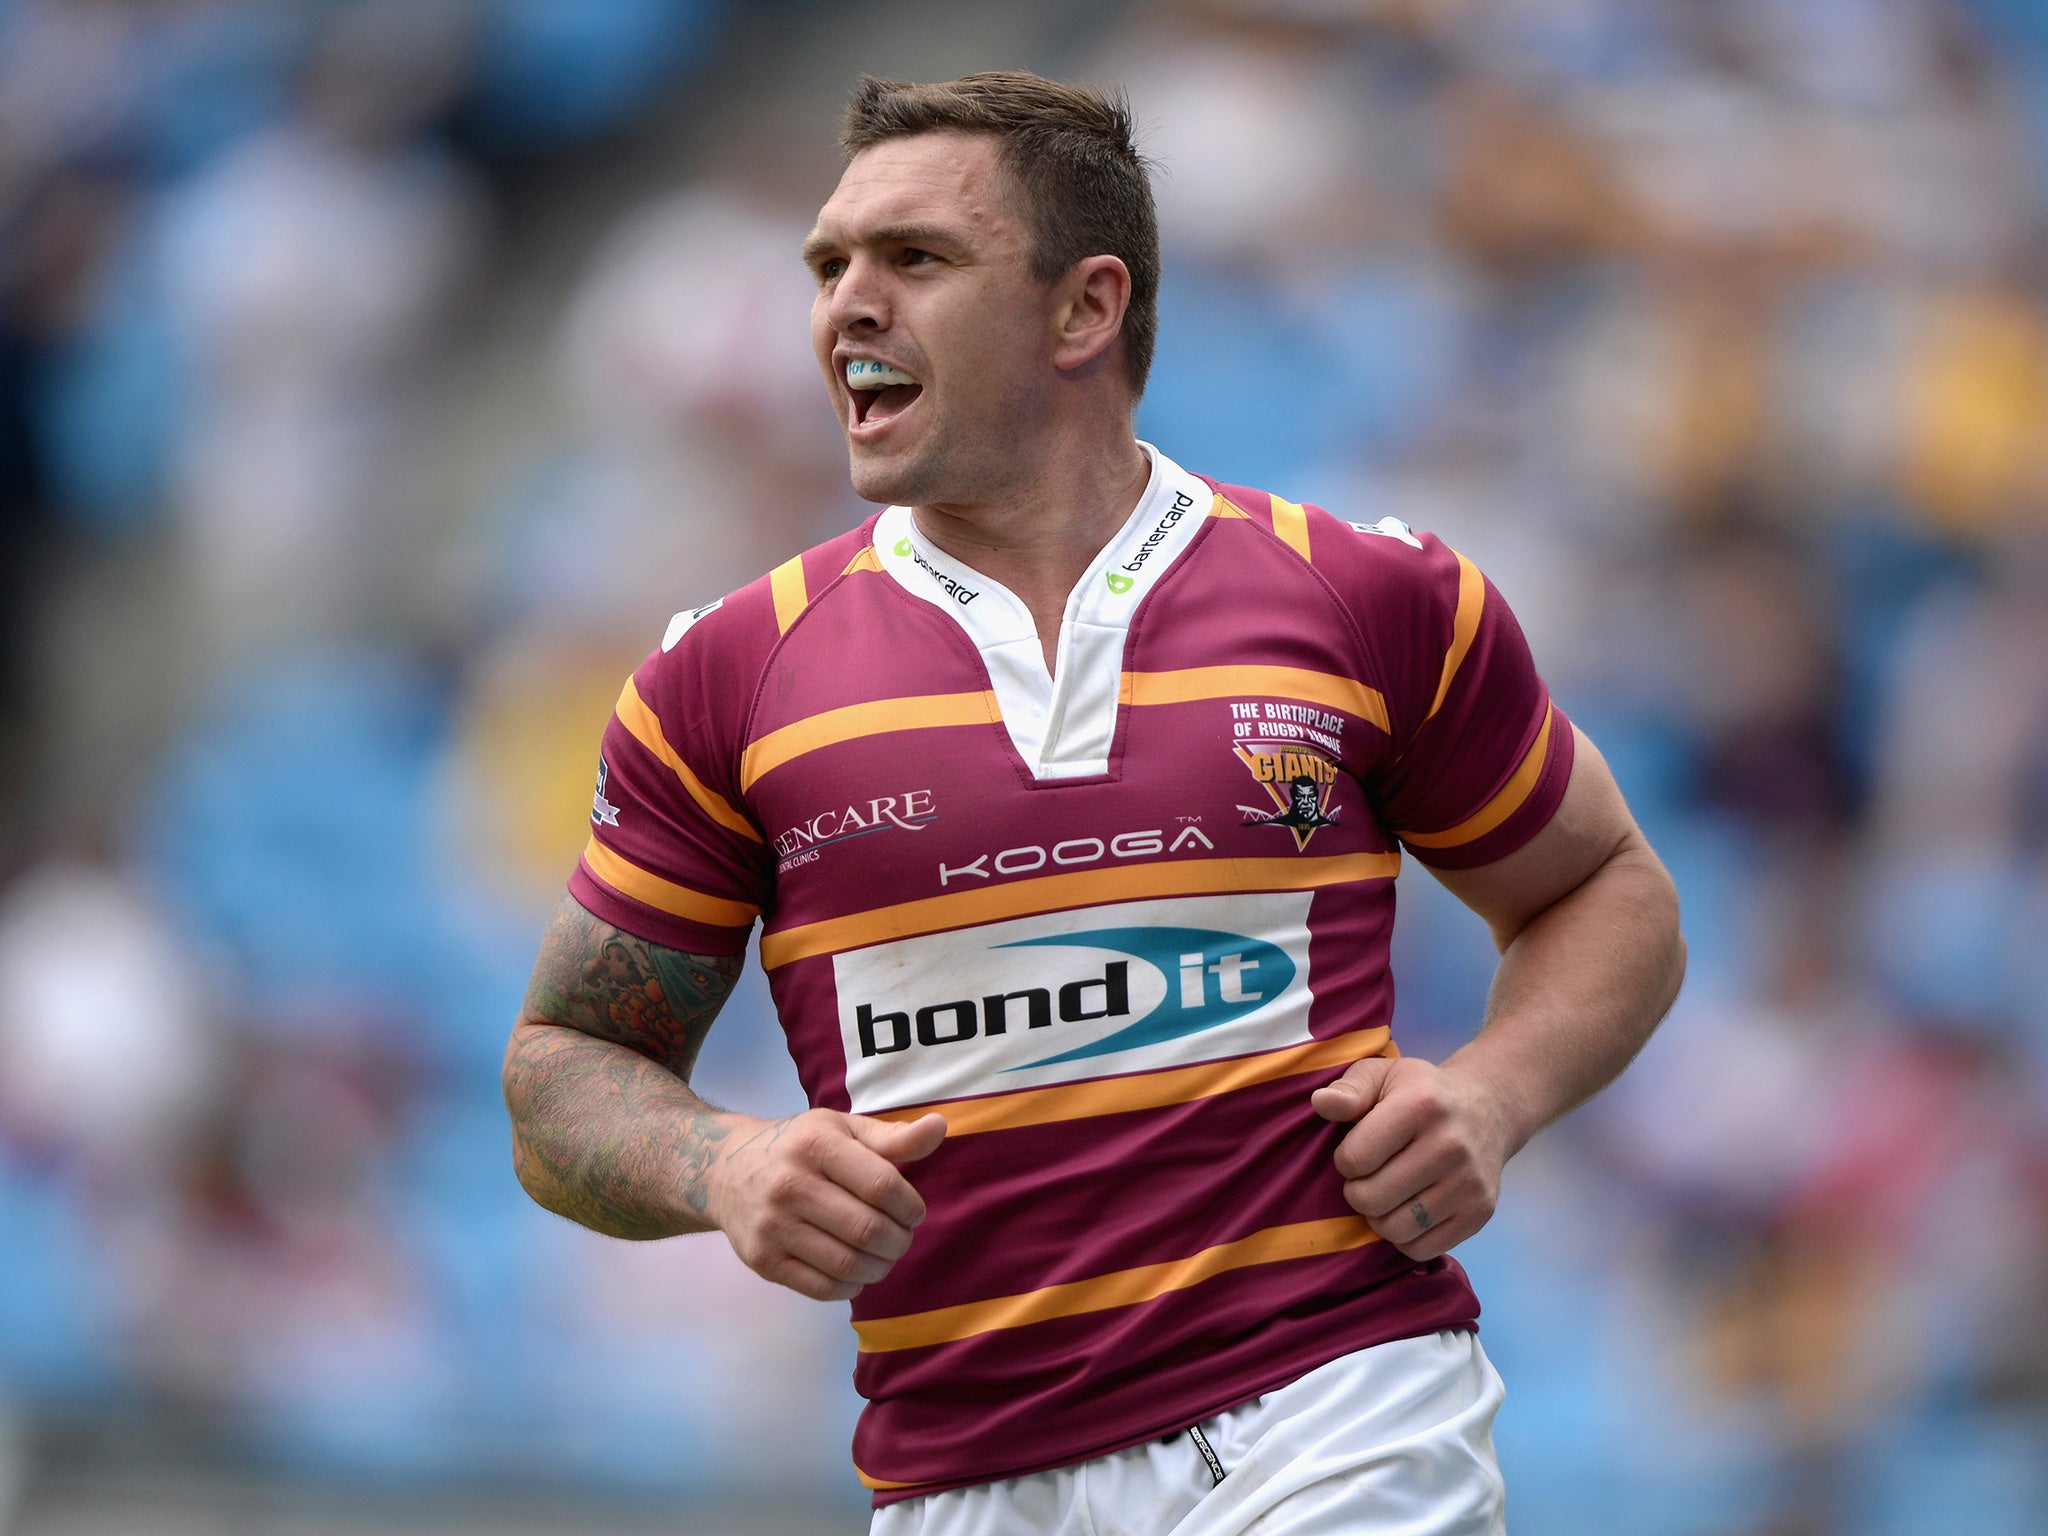 Huddersfield skipper Danny Brough supplied a rare touch of class to proceedings